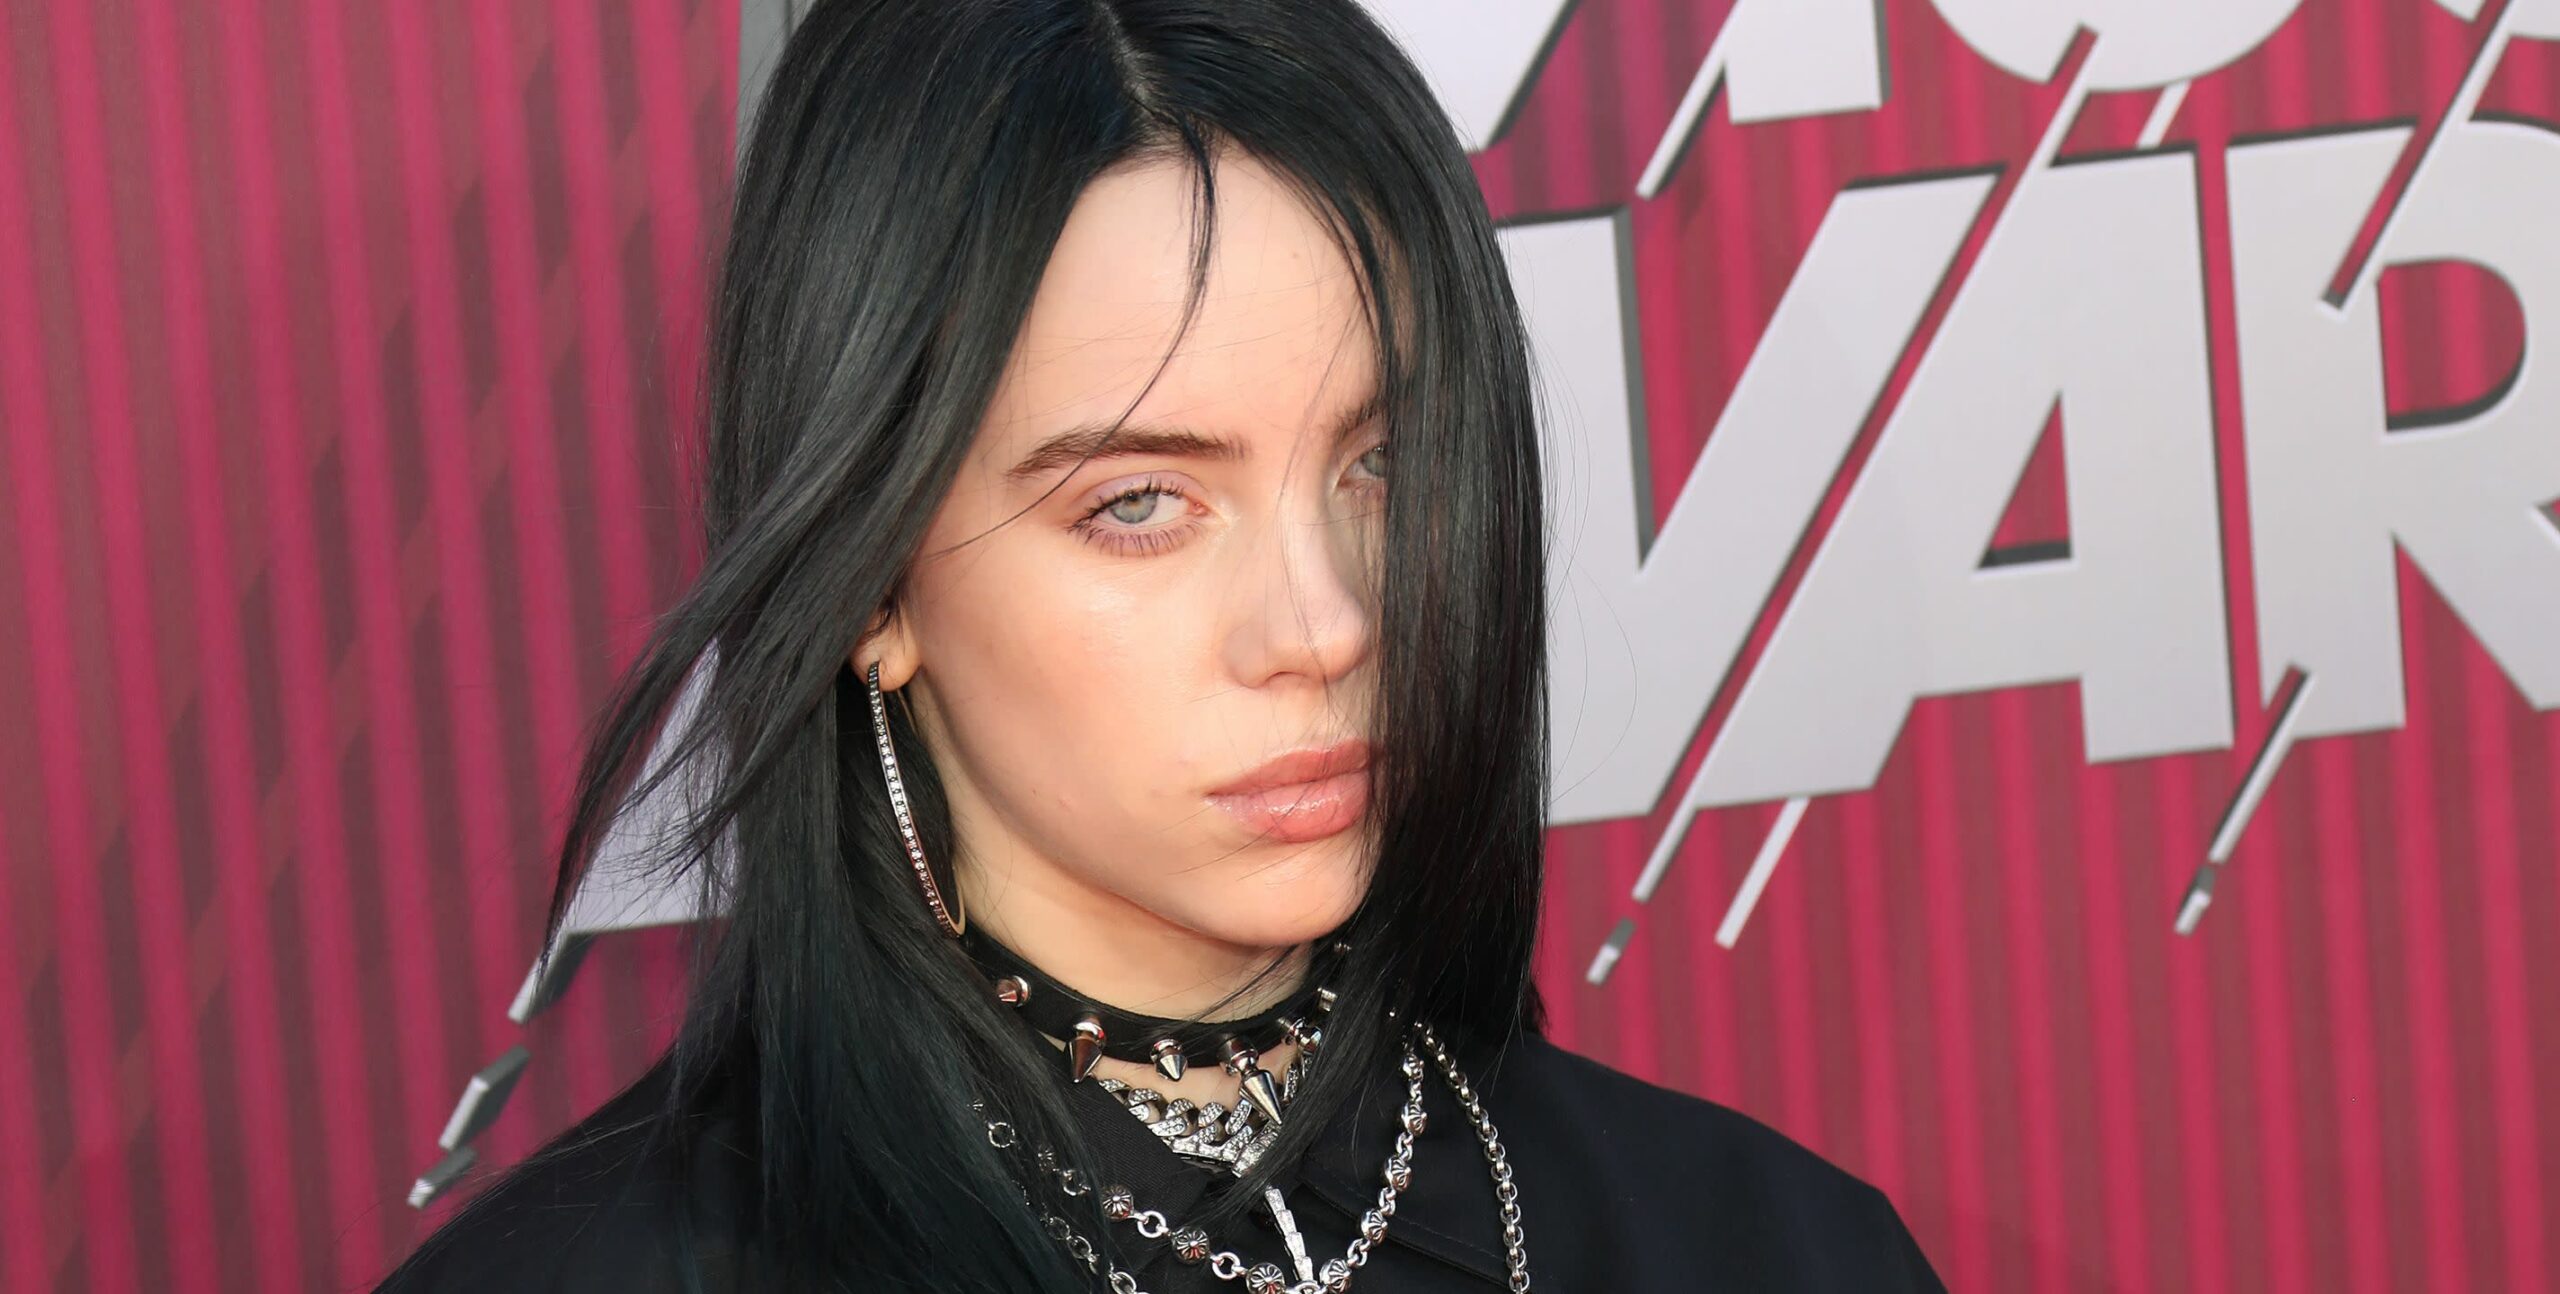 What is Billie Eilish real name?